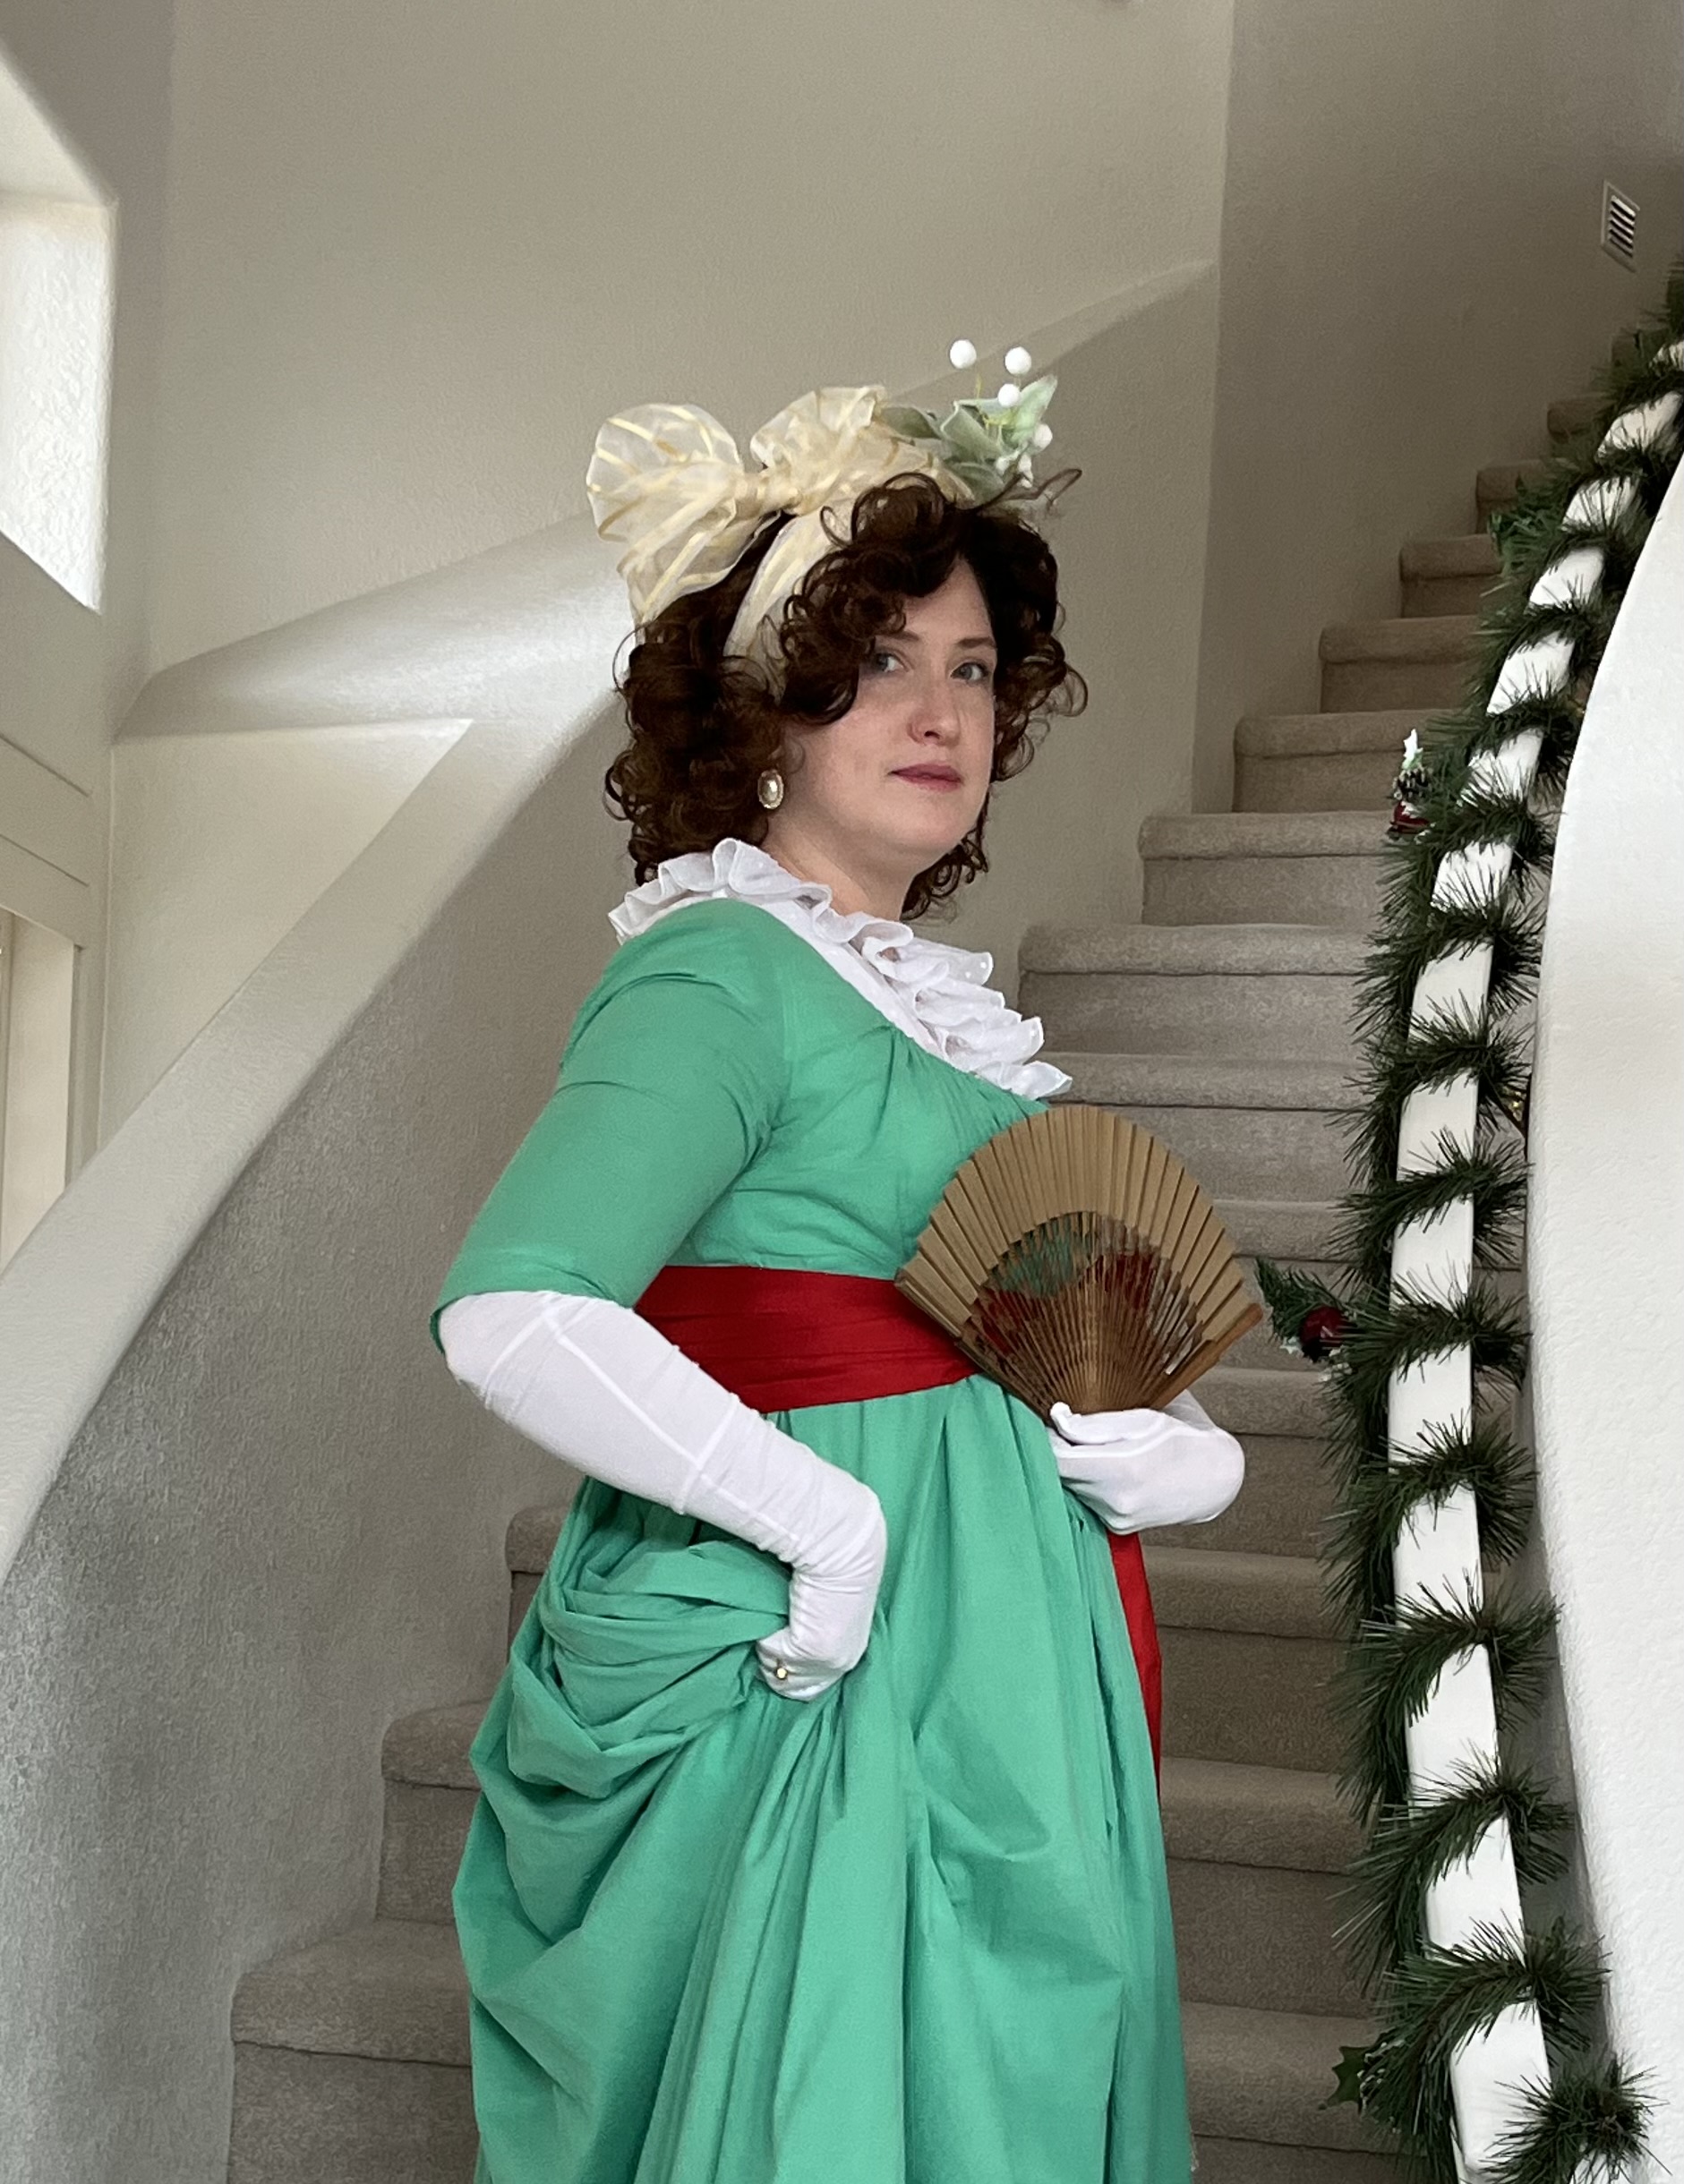 Tabubilgirl stands on a staircase wearing a 1790s New Year ensemble - a green 1790s round gown with a red sash and holding a gold fan.